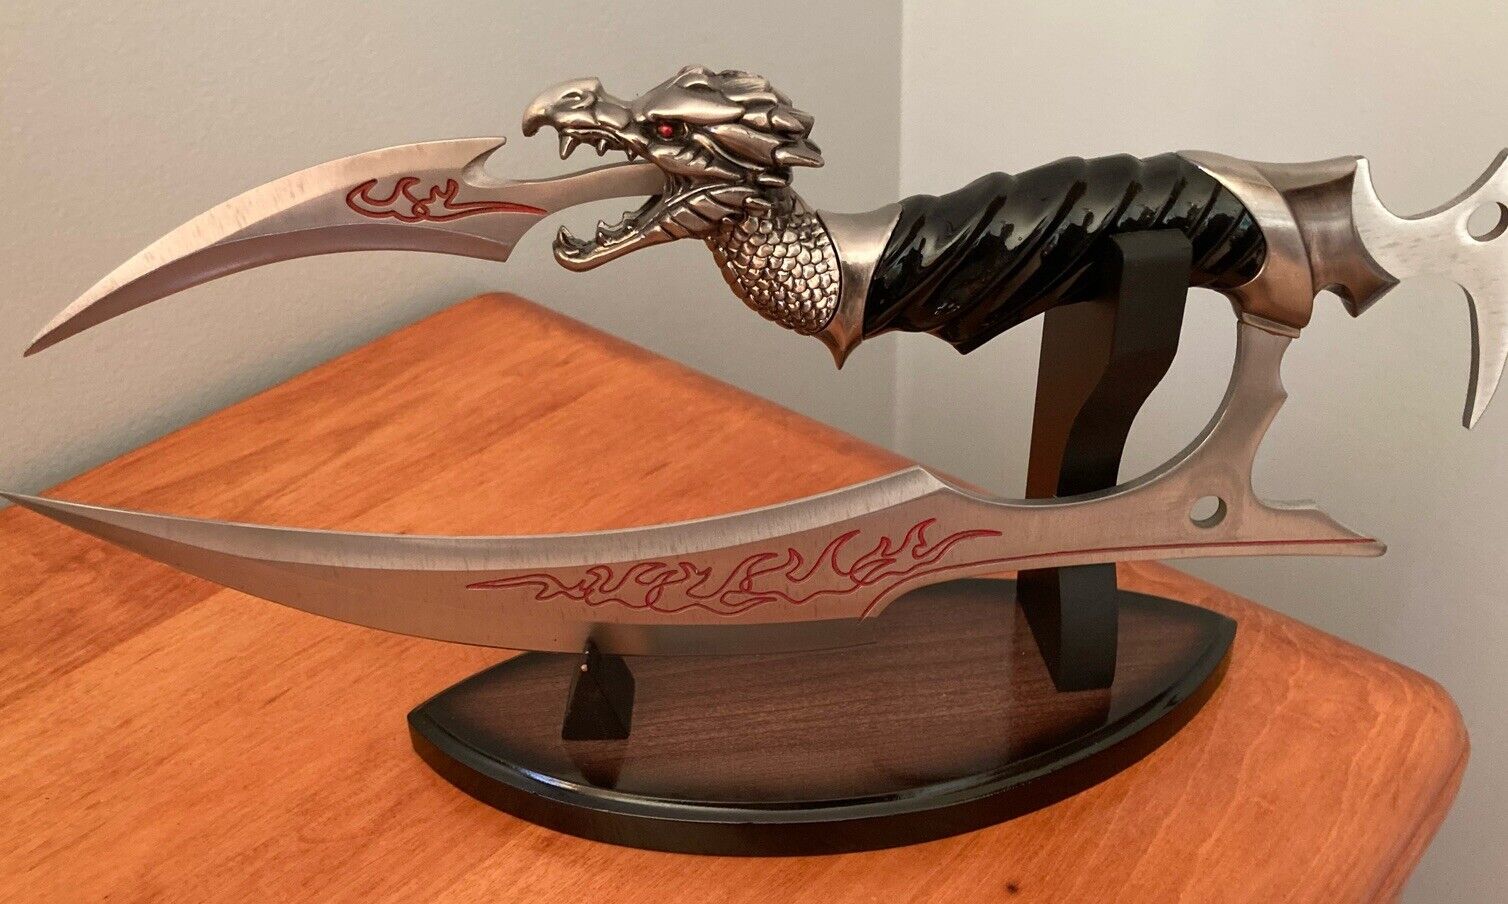 Rare Vintage JIM FROST Dragon Slayer Stainless Steel Knife With Display Stand